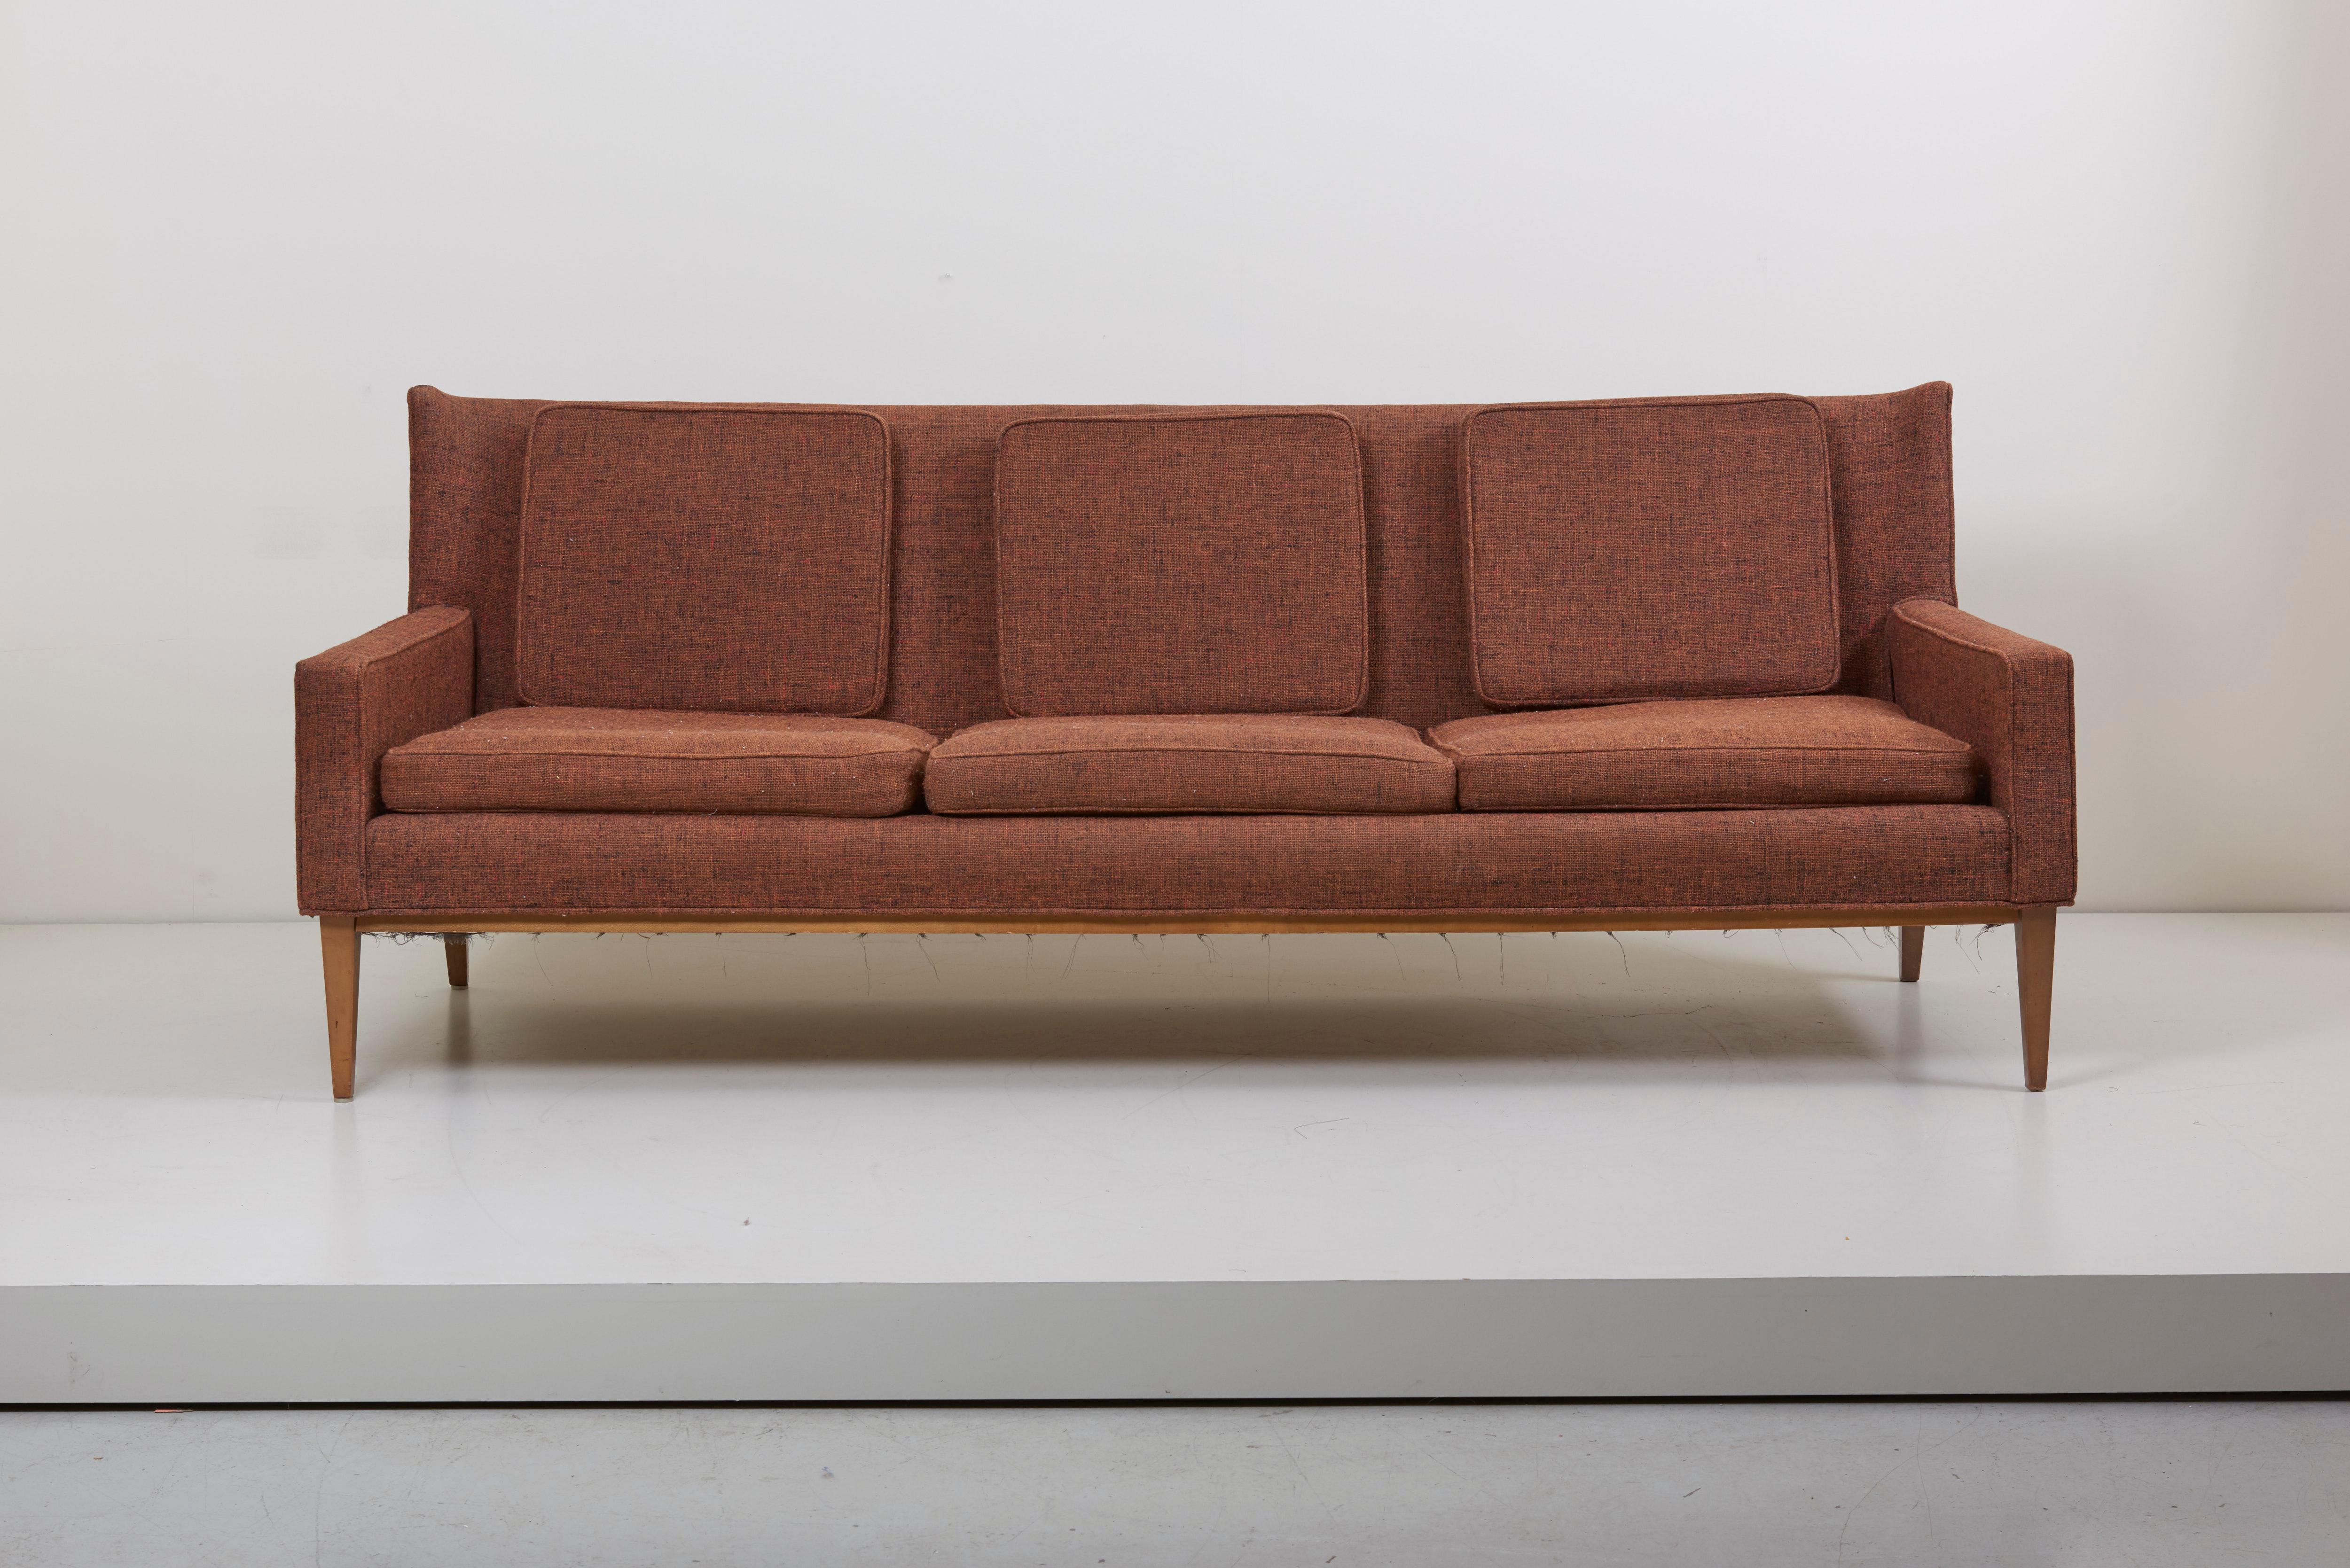 Paul McCobb sofa model 1307 for Directional features a slight winged back resting on a maple frame that gives the sofa a floating look with loose cushions on seat and back.

Upholstery needed, could be done in our own upholstery workshop,